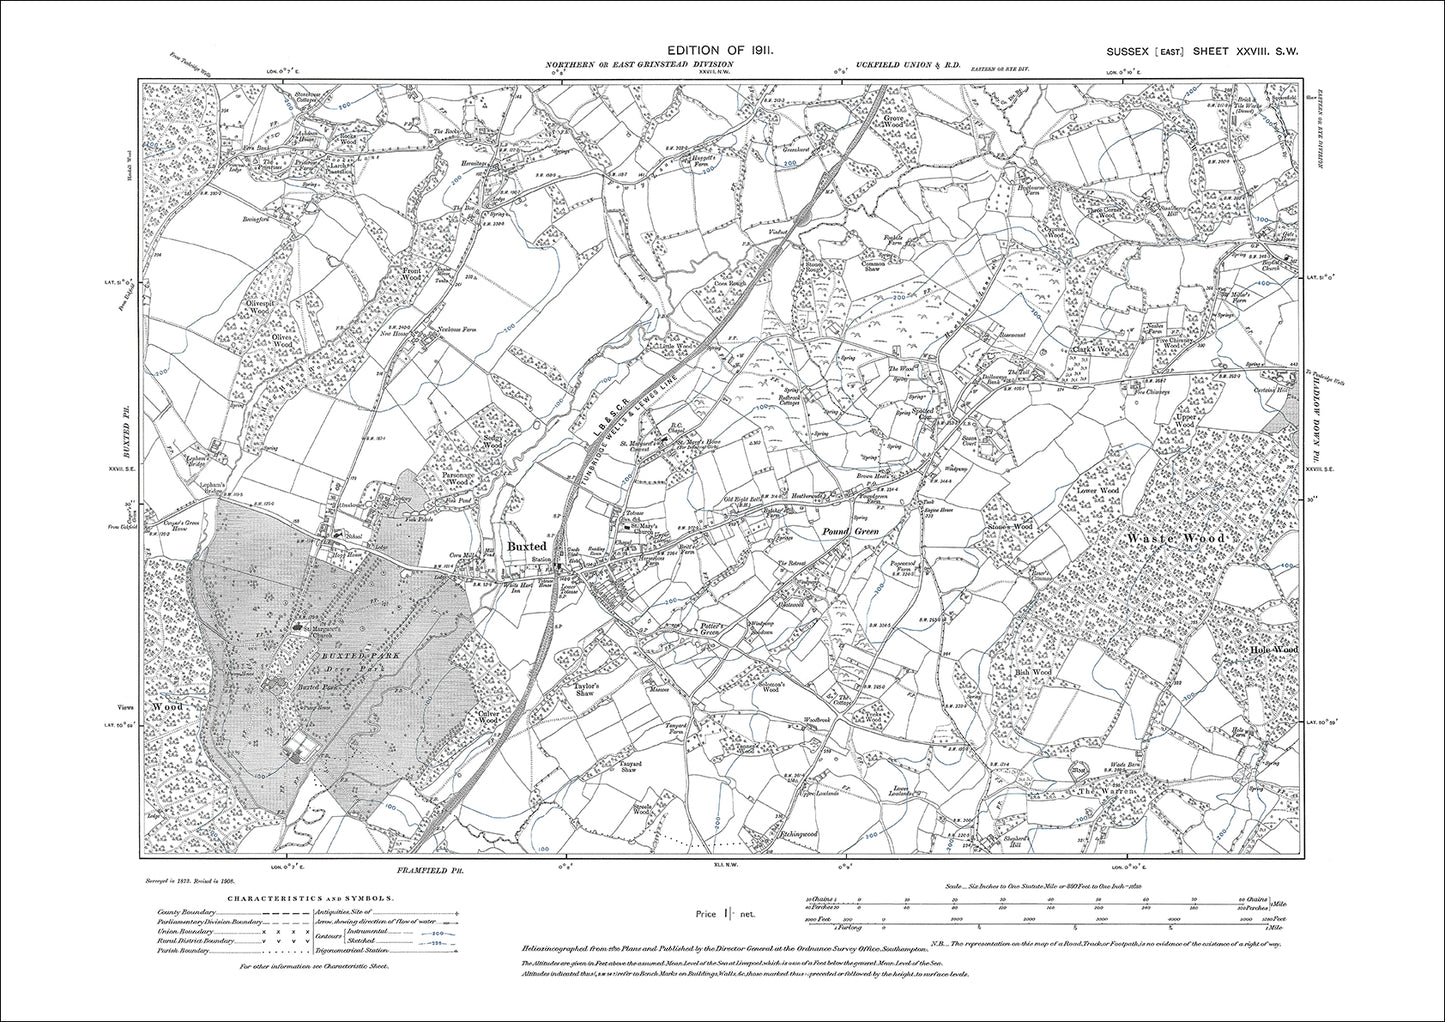 Buxted, Pound Green, old map Sussex 1911: 28SW